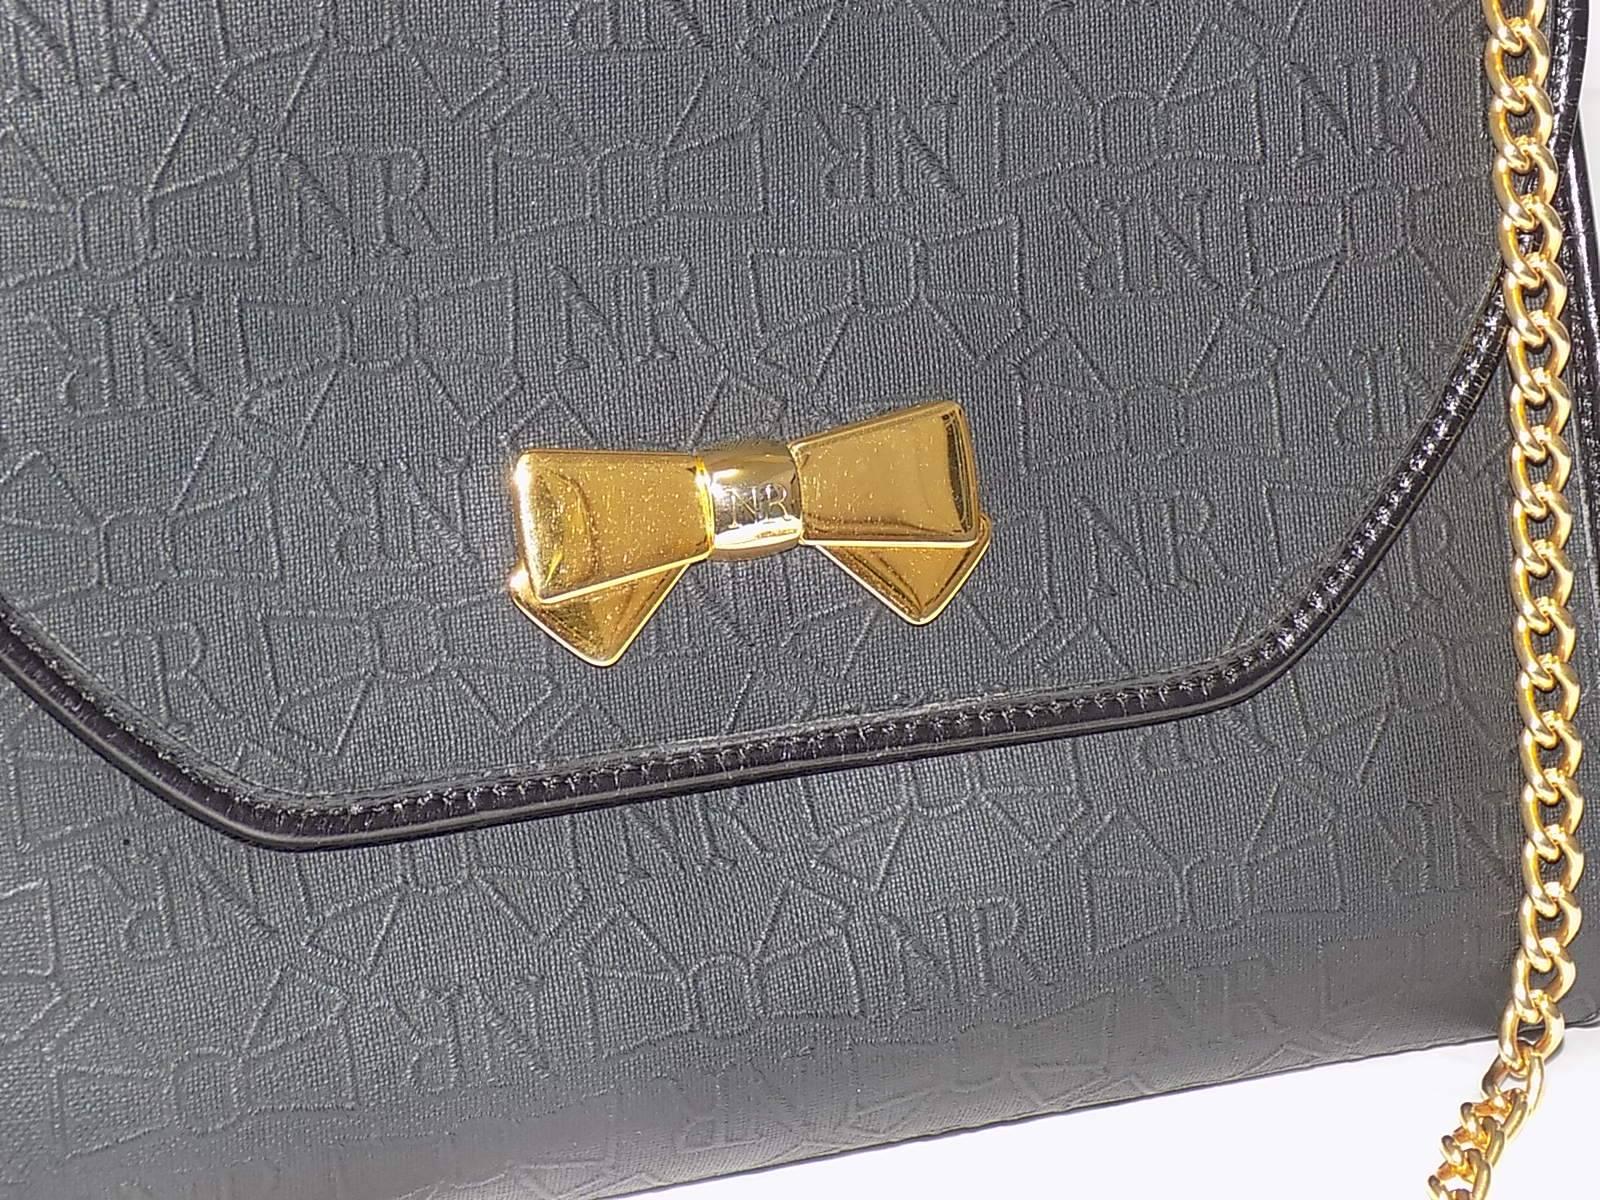 Nina Ricci black coated canvas with leather trims Gold Chain shoulder bag convertible to clutch bag. Gold signature bow at the front. NR logo and bow imprint all over the bag. Leather trim. 
Measures  8